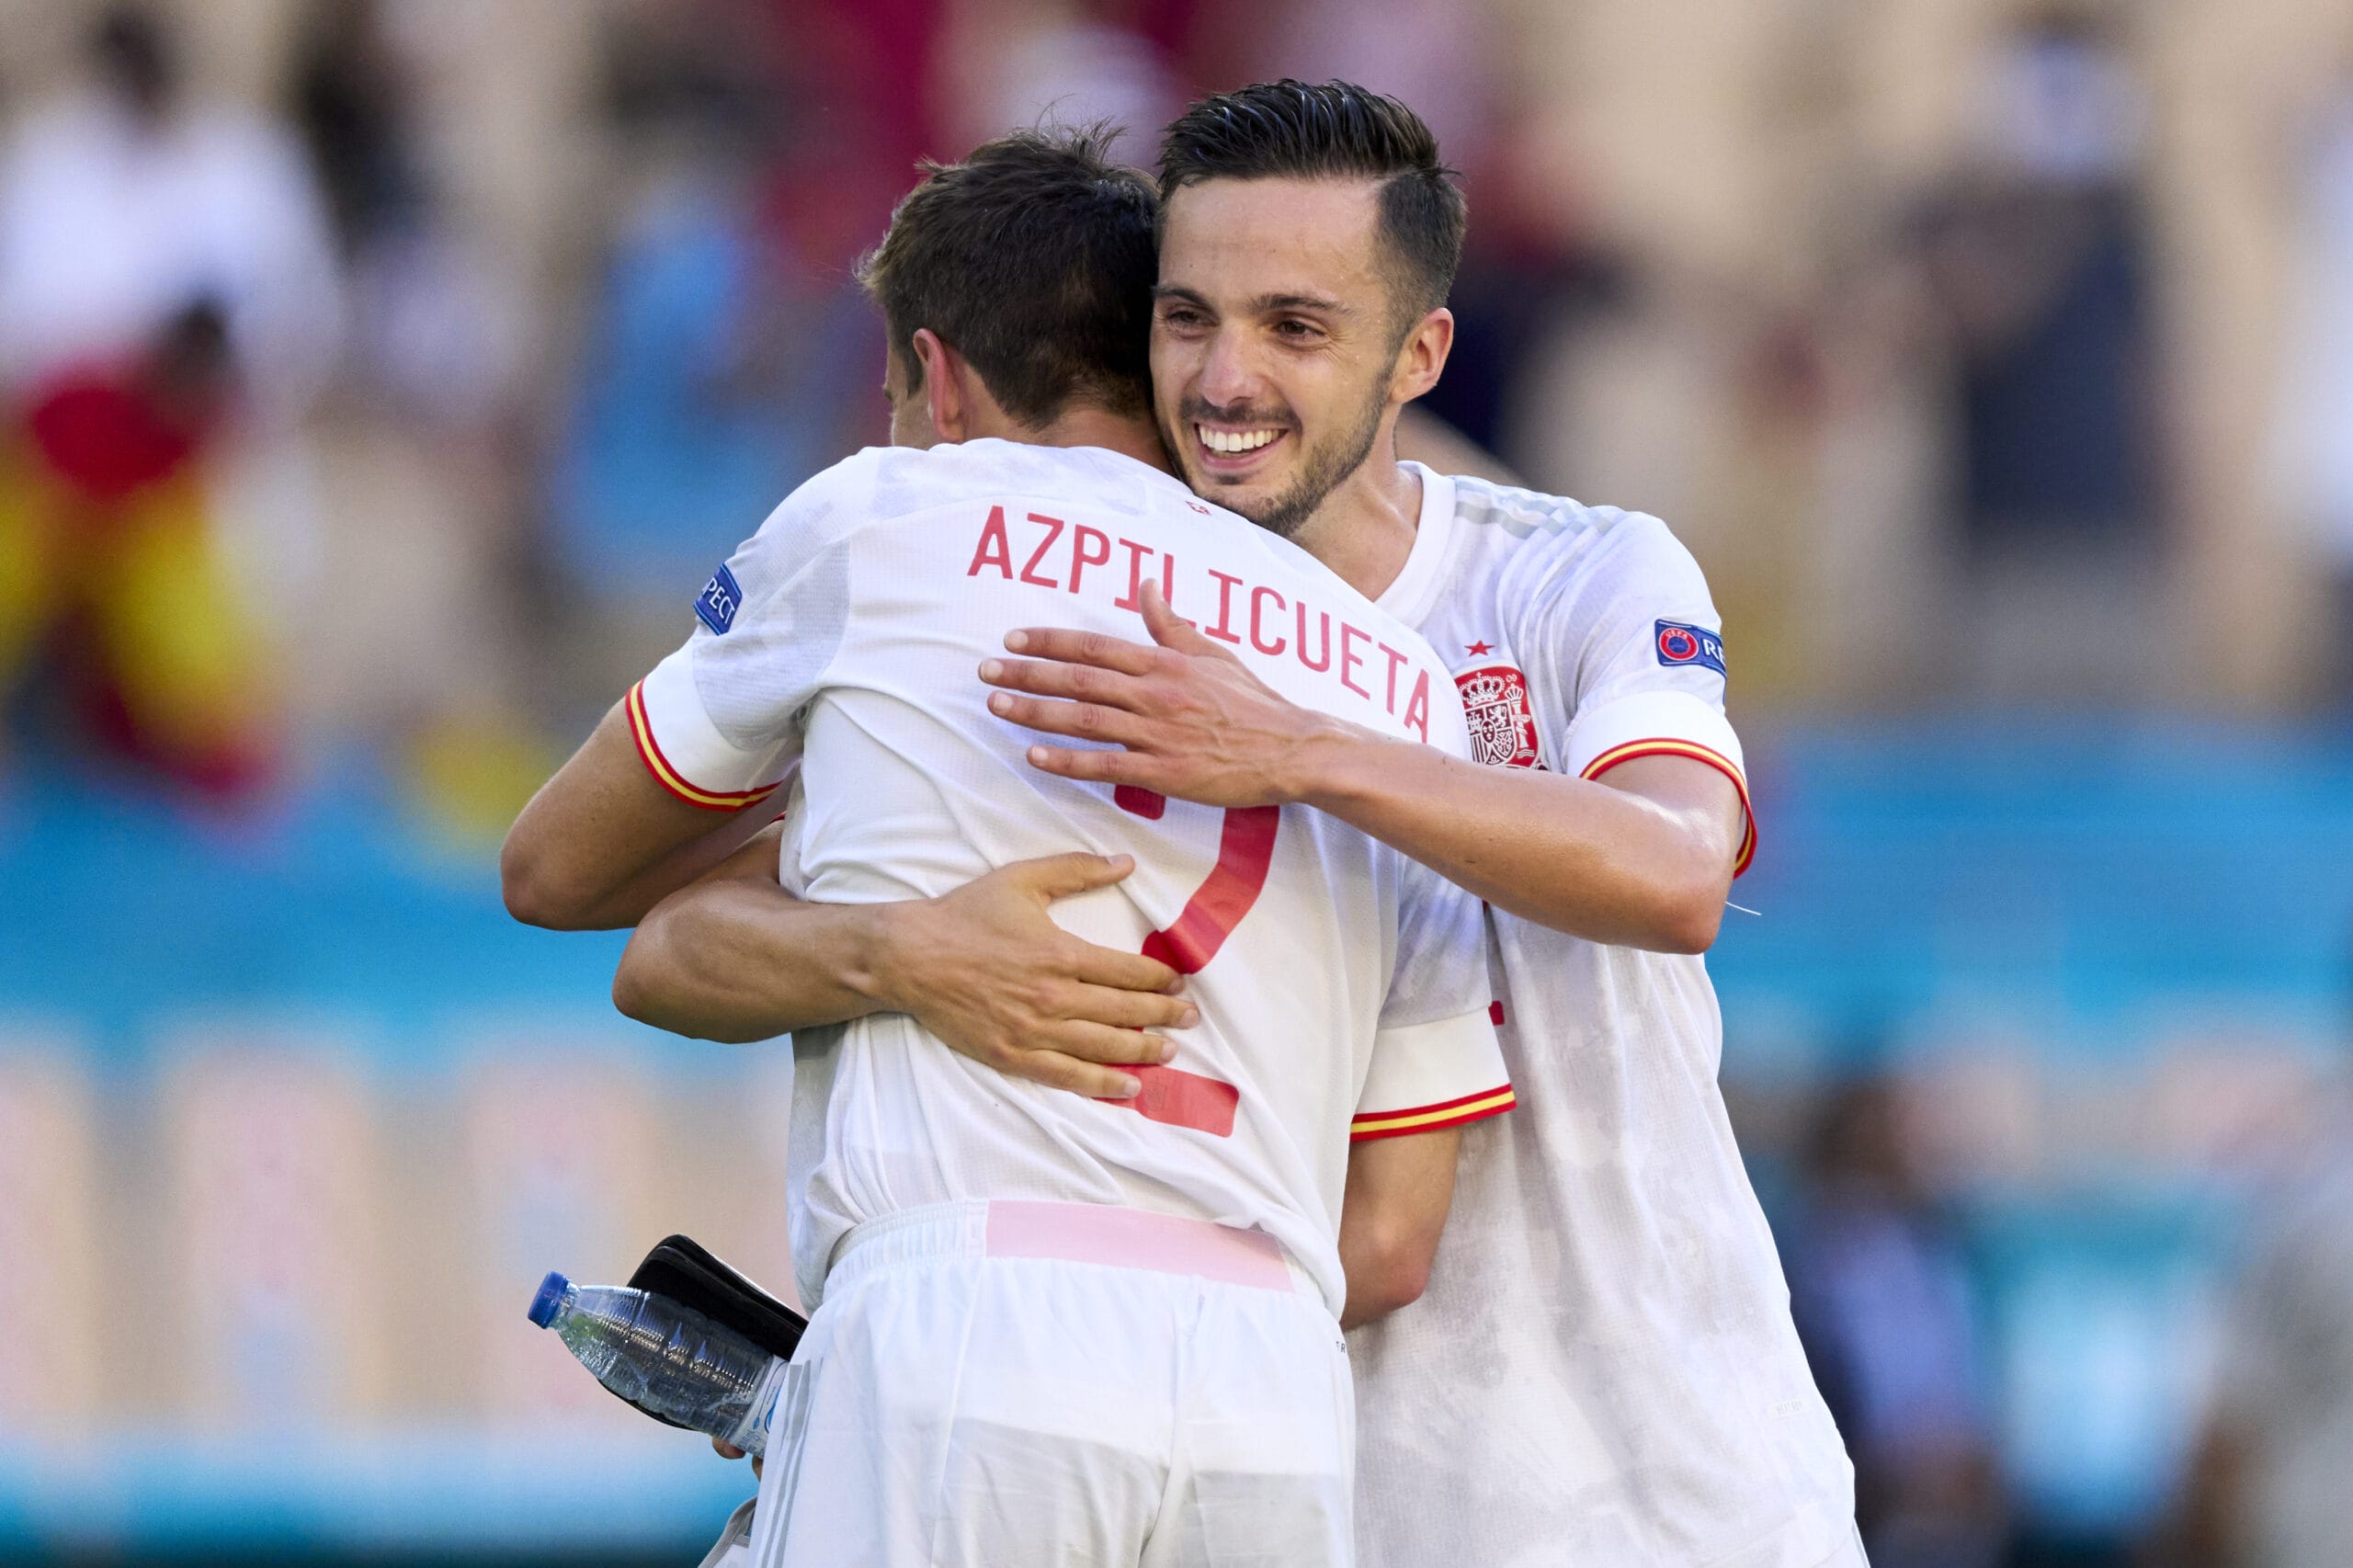 SEVILLE, SPAIN - JUNE 23: Pablo Sarabia salutes after the game during the UEFA Euro 2020 Championship Group E match between Slovakia and Spain at Estadio La Cartuja on June 23, 2021 in Seville, Spain.